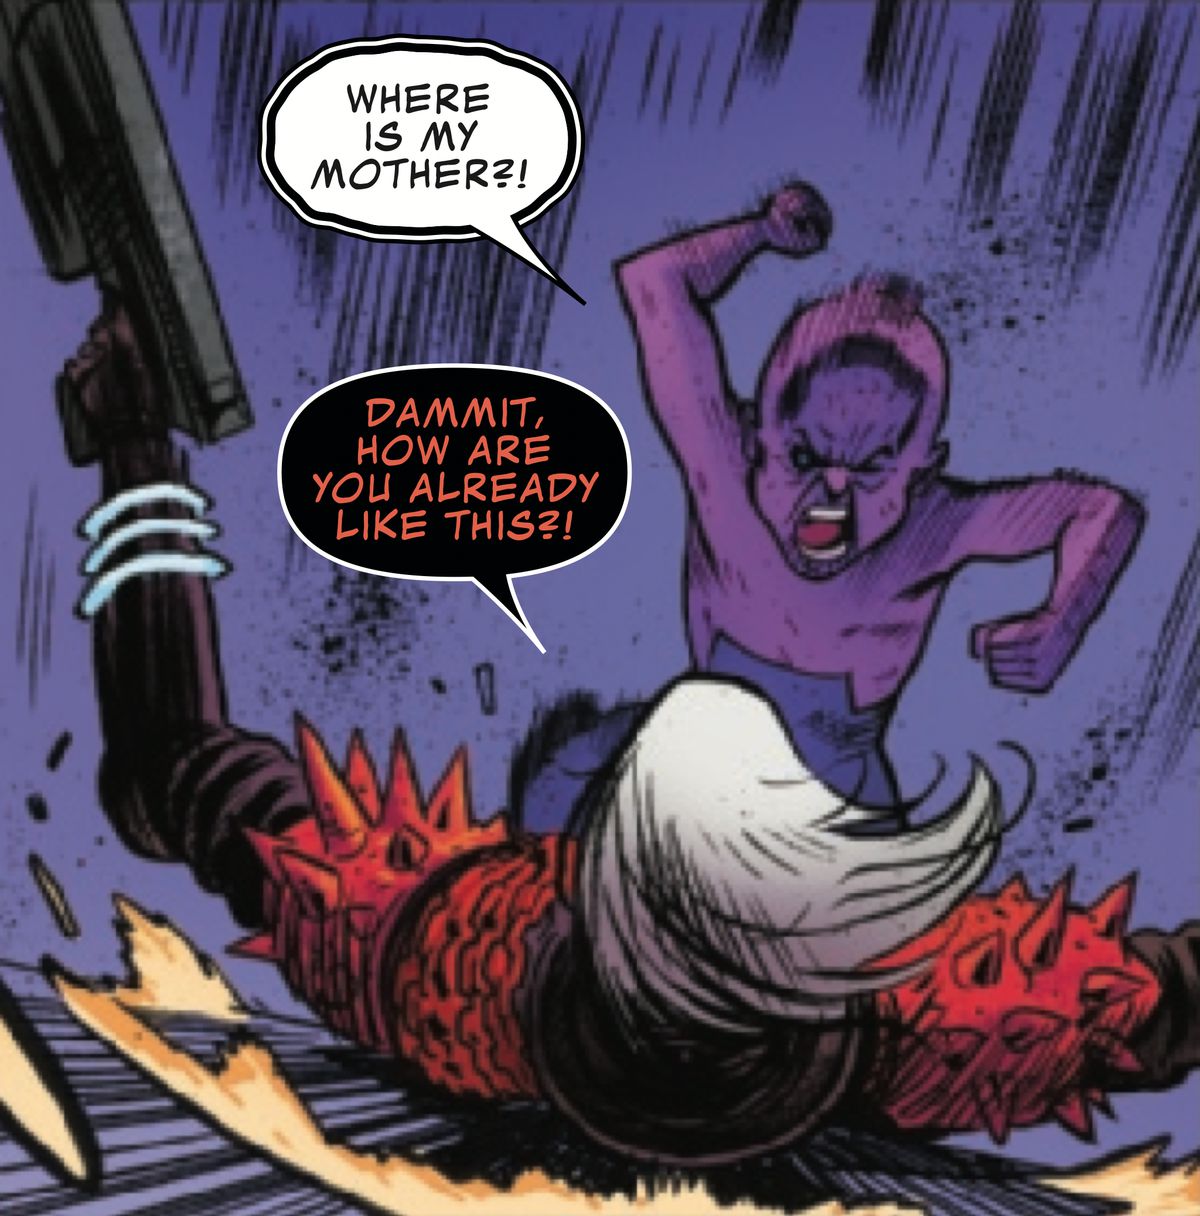 Baby Thanos and the Cosmic Ghost Rider in Cosmic Ghost Rider #1, Marvel Comics (2018). 